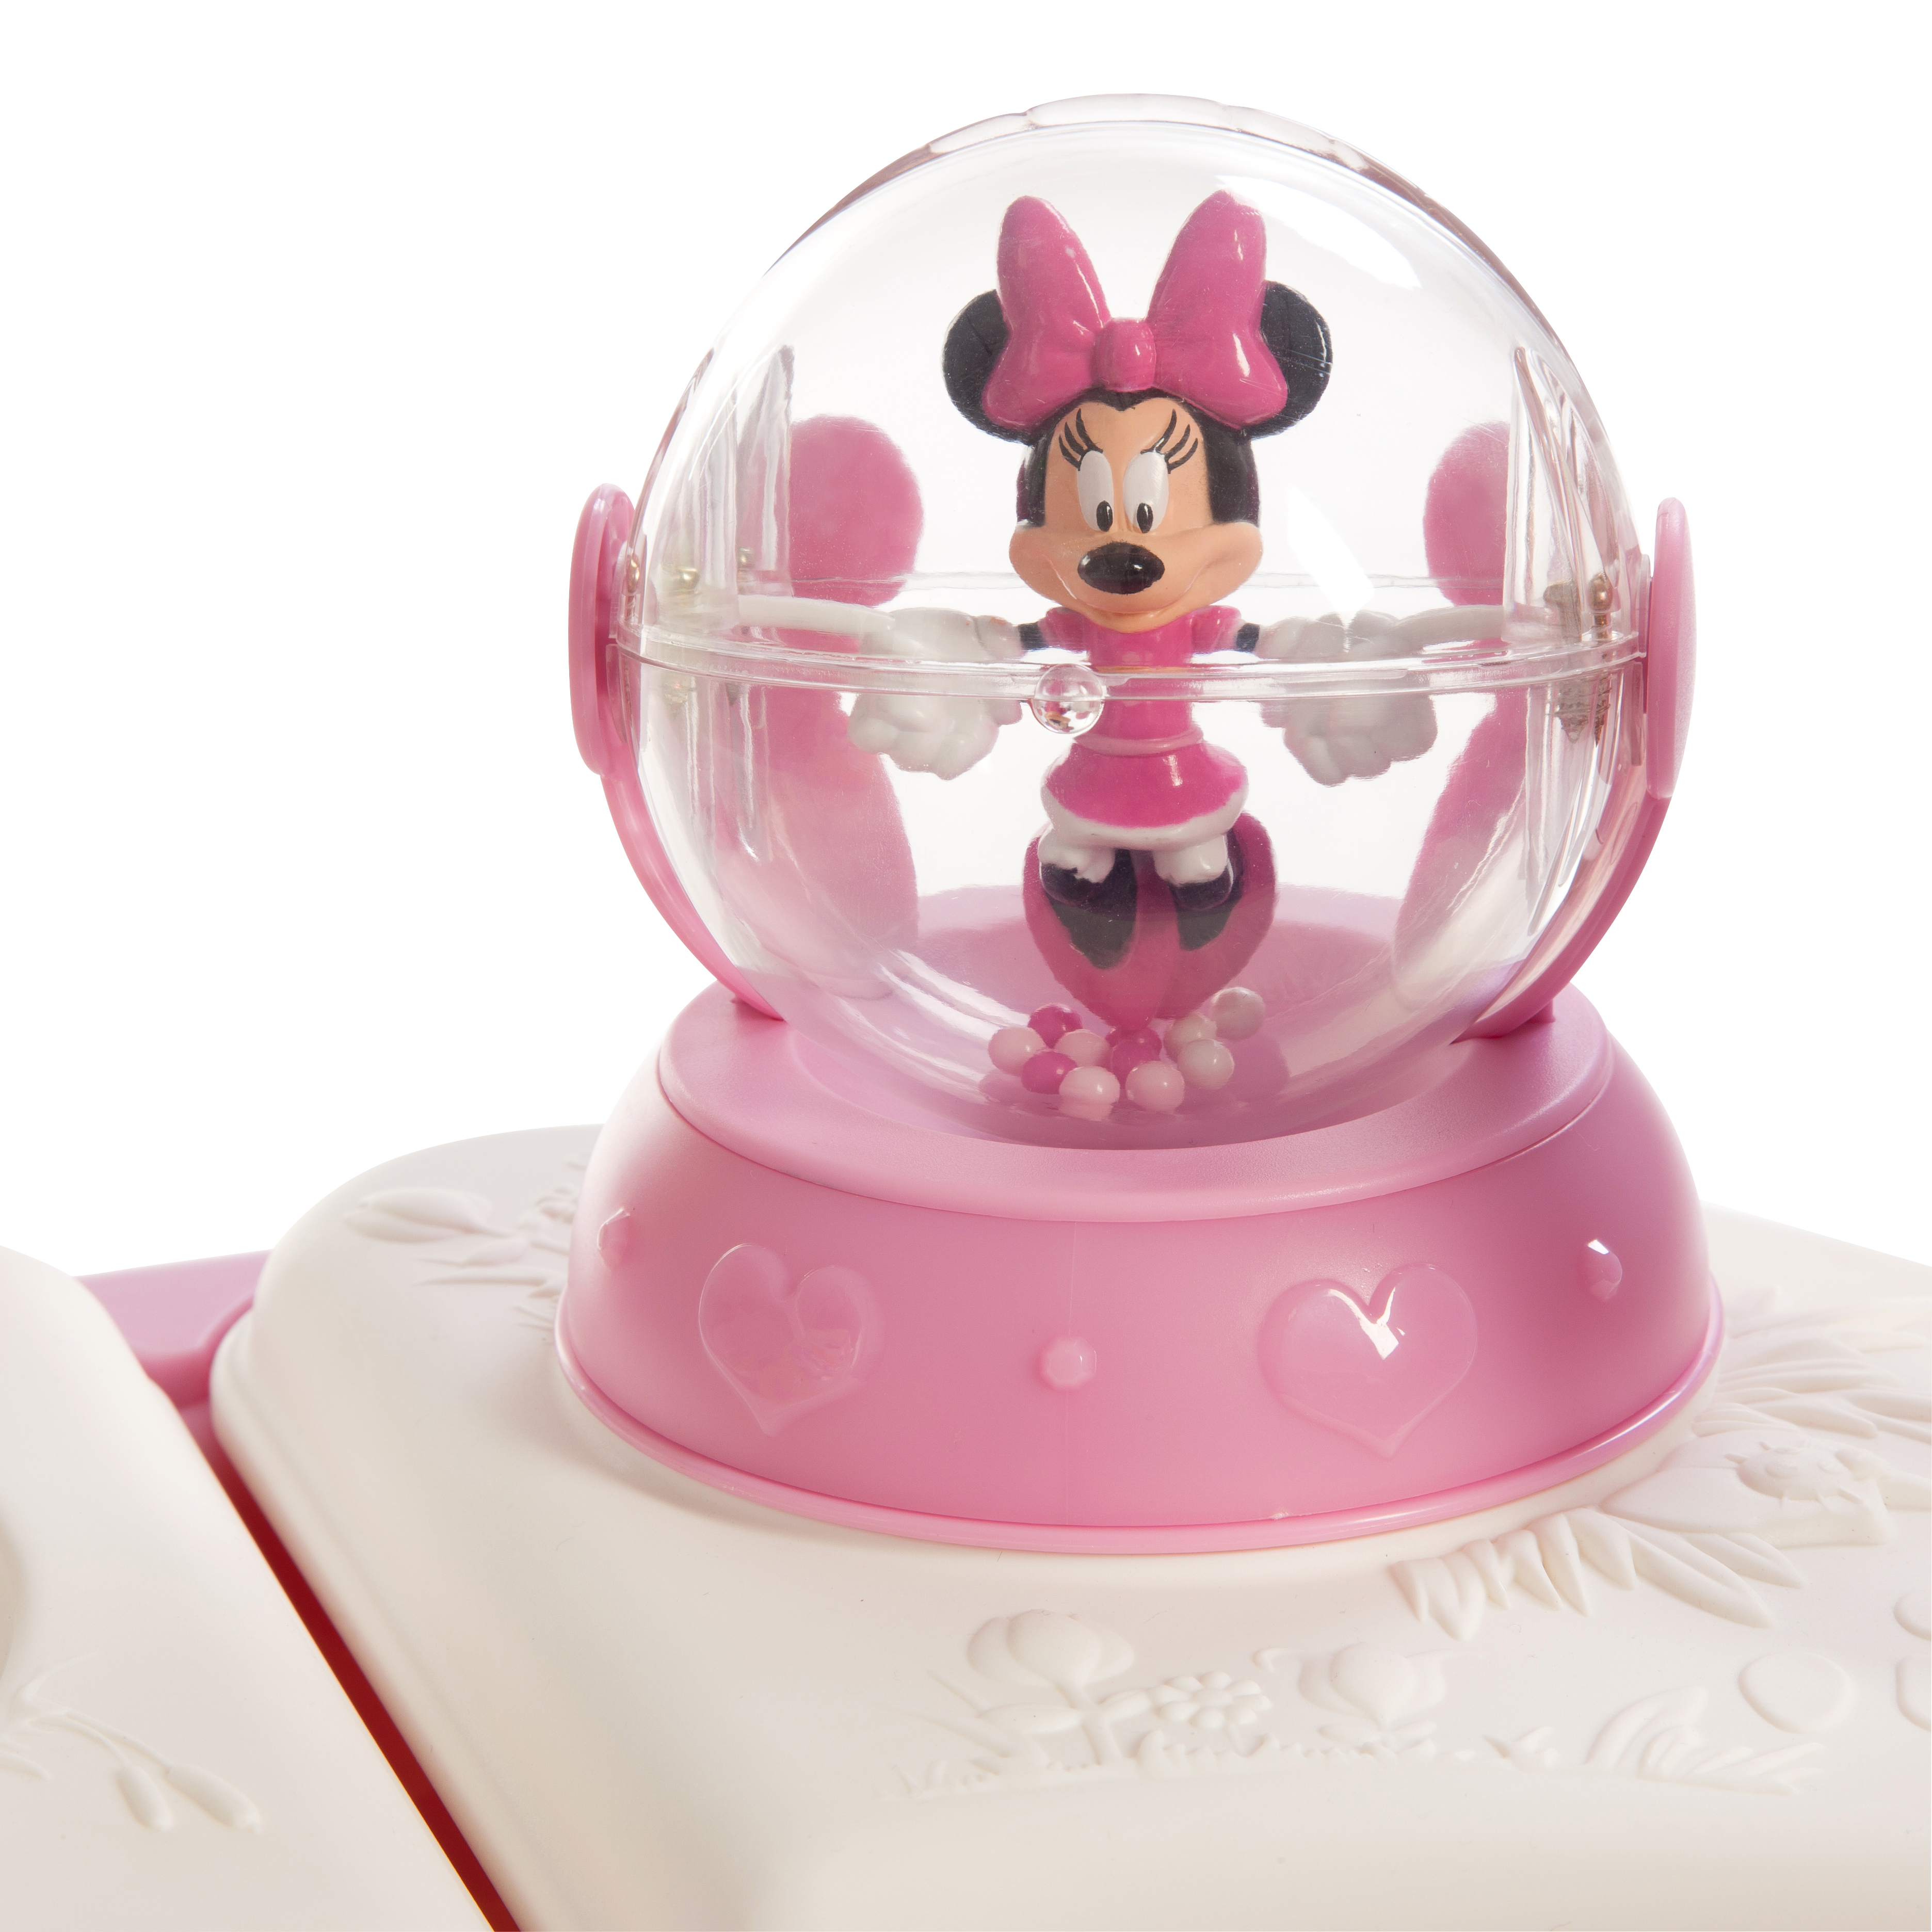 disney baby minnie mouse music & lights walker manual